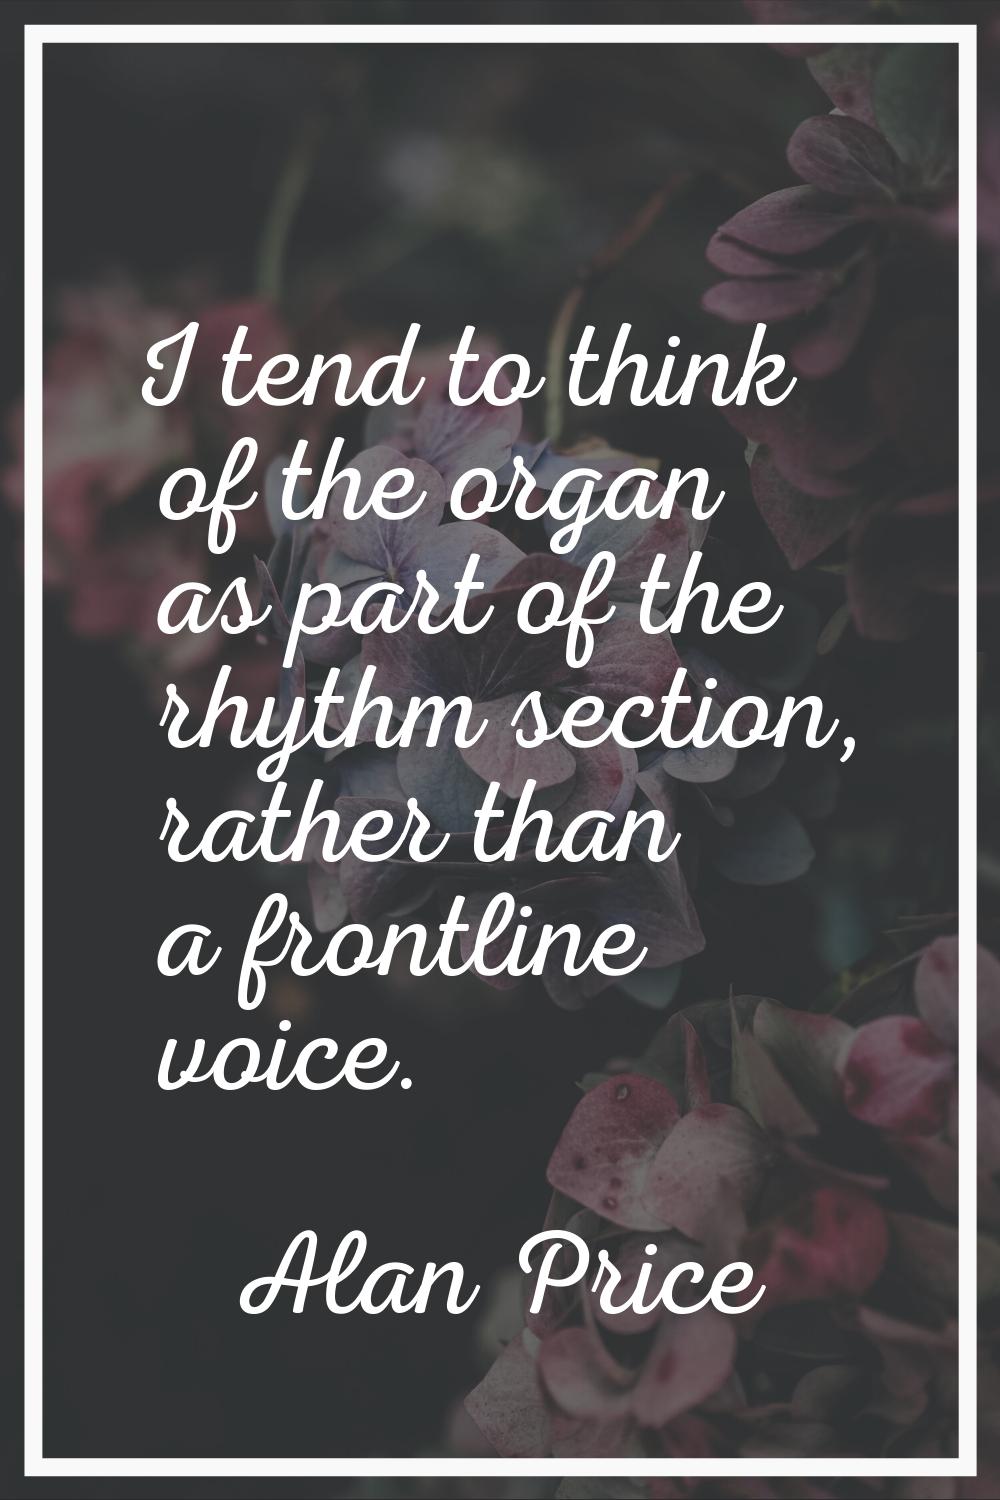 I tend to think of the organ as part of the rhythm section, rather than a frontline voice.